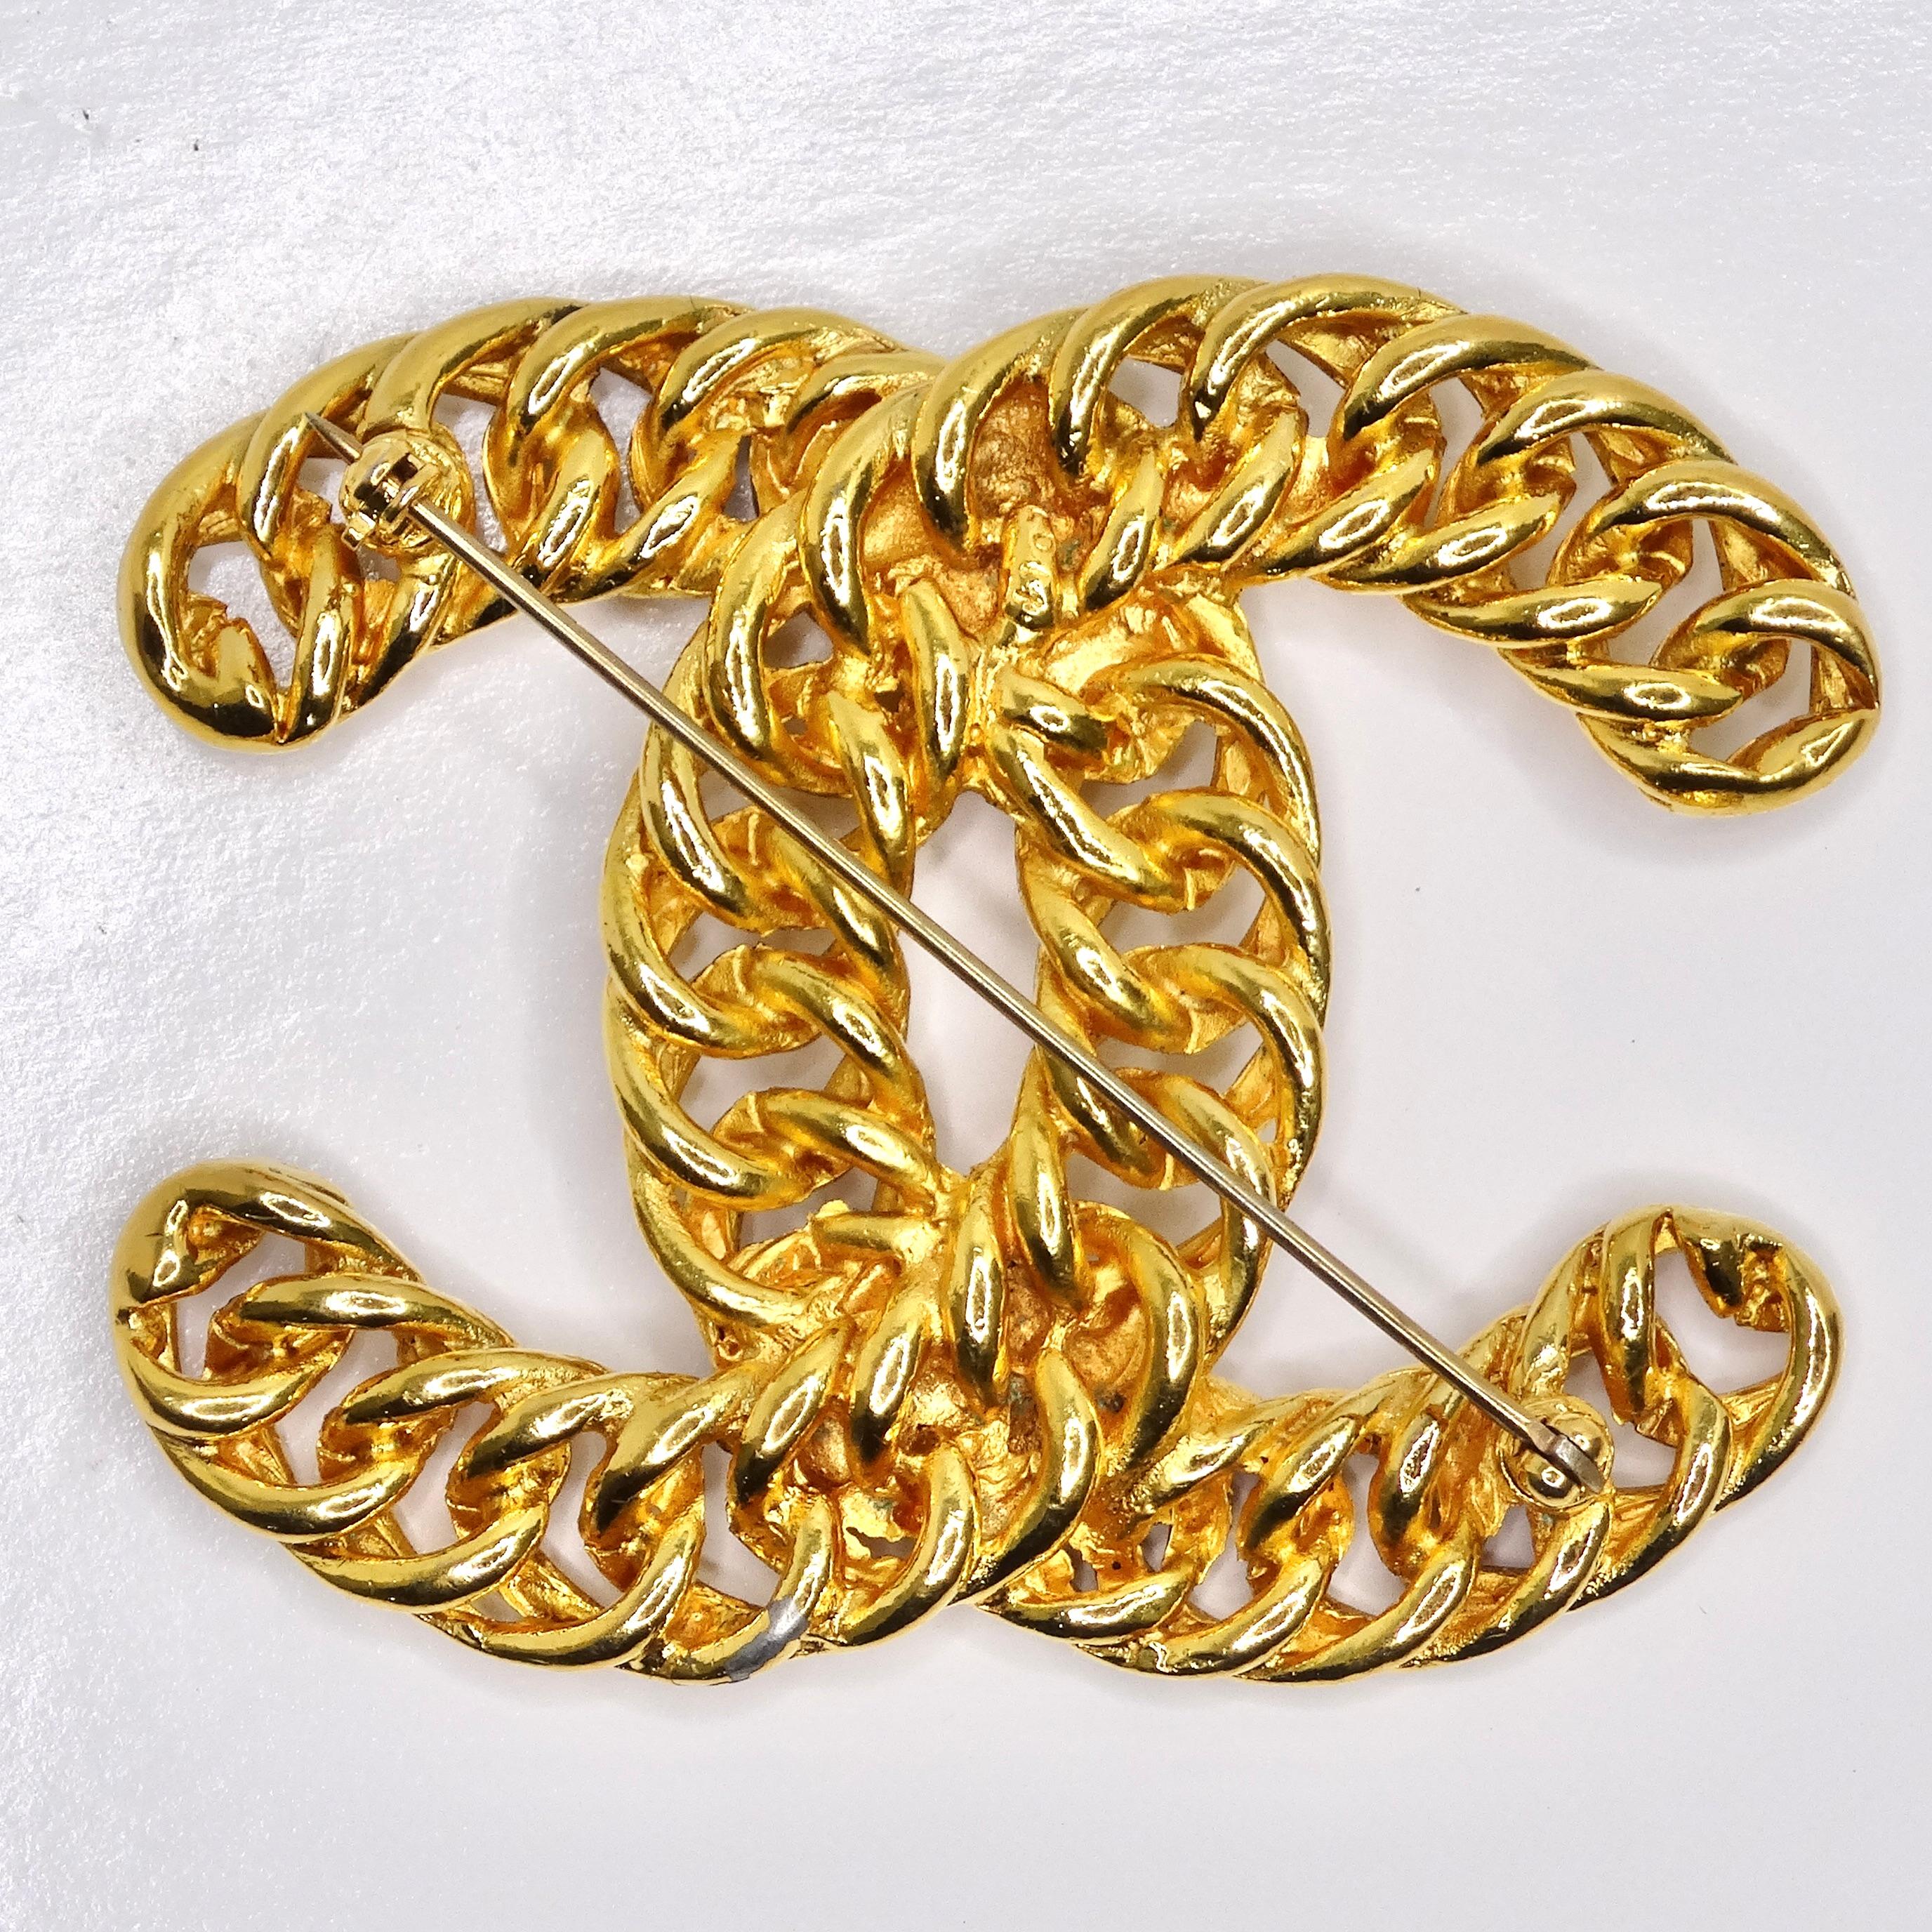 Chanel 1980s 24K Gold Plated CC Chain Brooch In Excellent Condition For Sale In Scottsdale, AZ